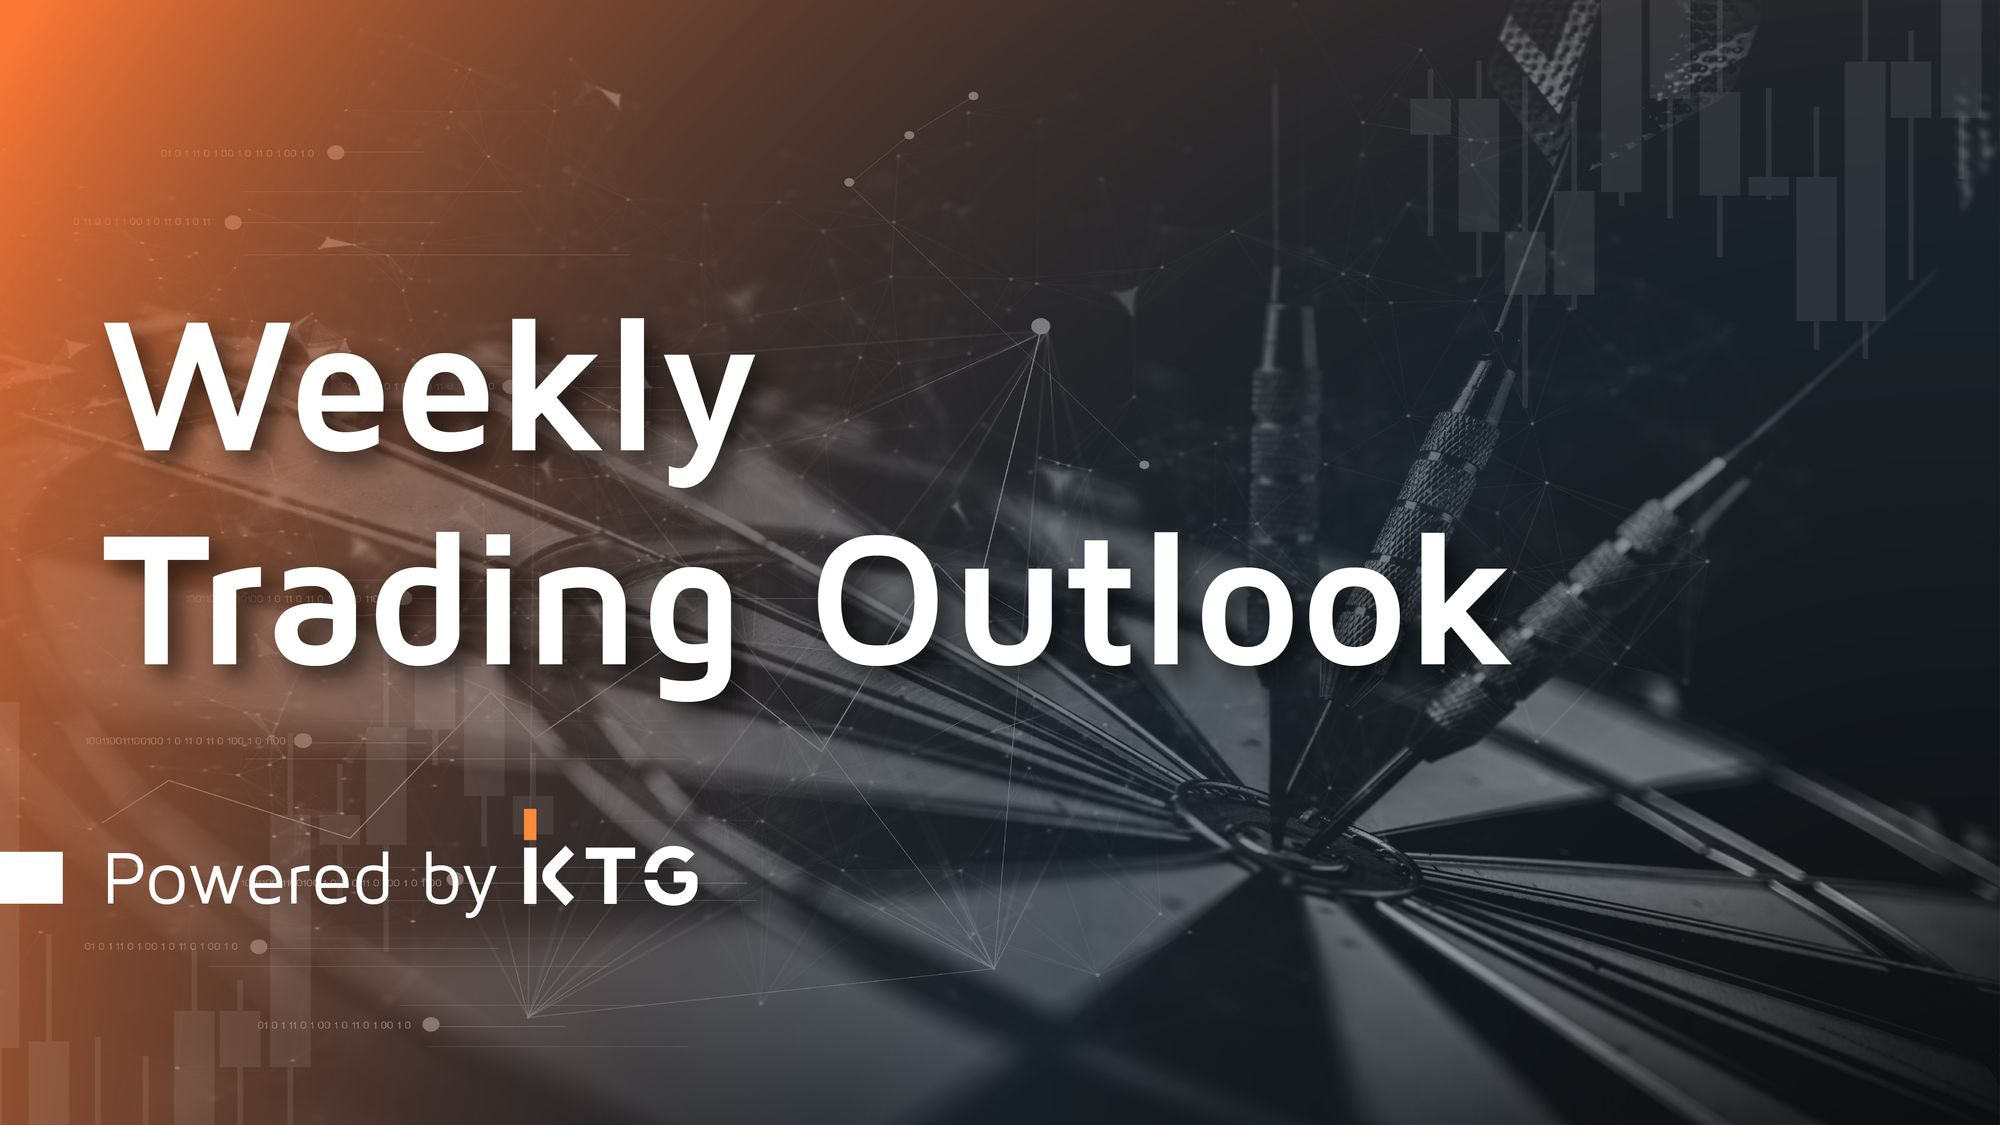 Range-bound trading continues #TradingOutlook - Powered by KTG